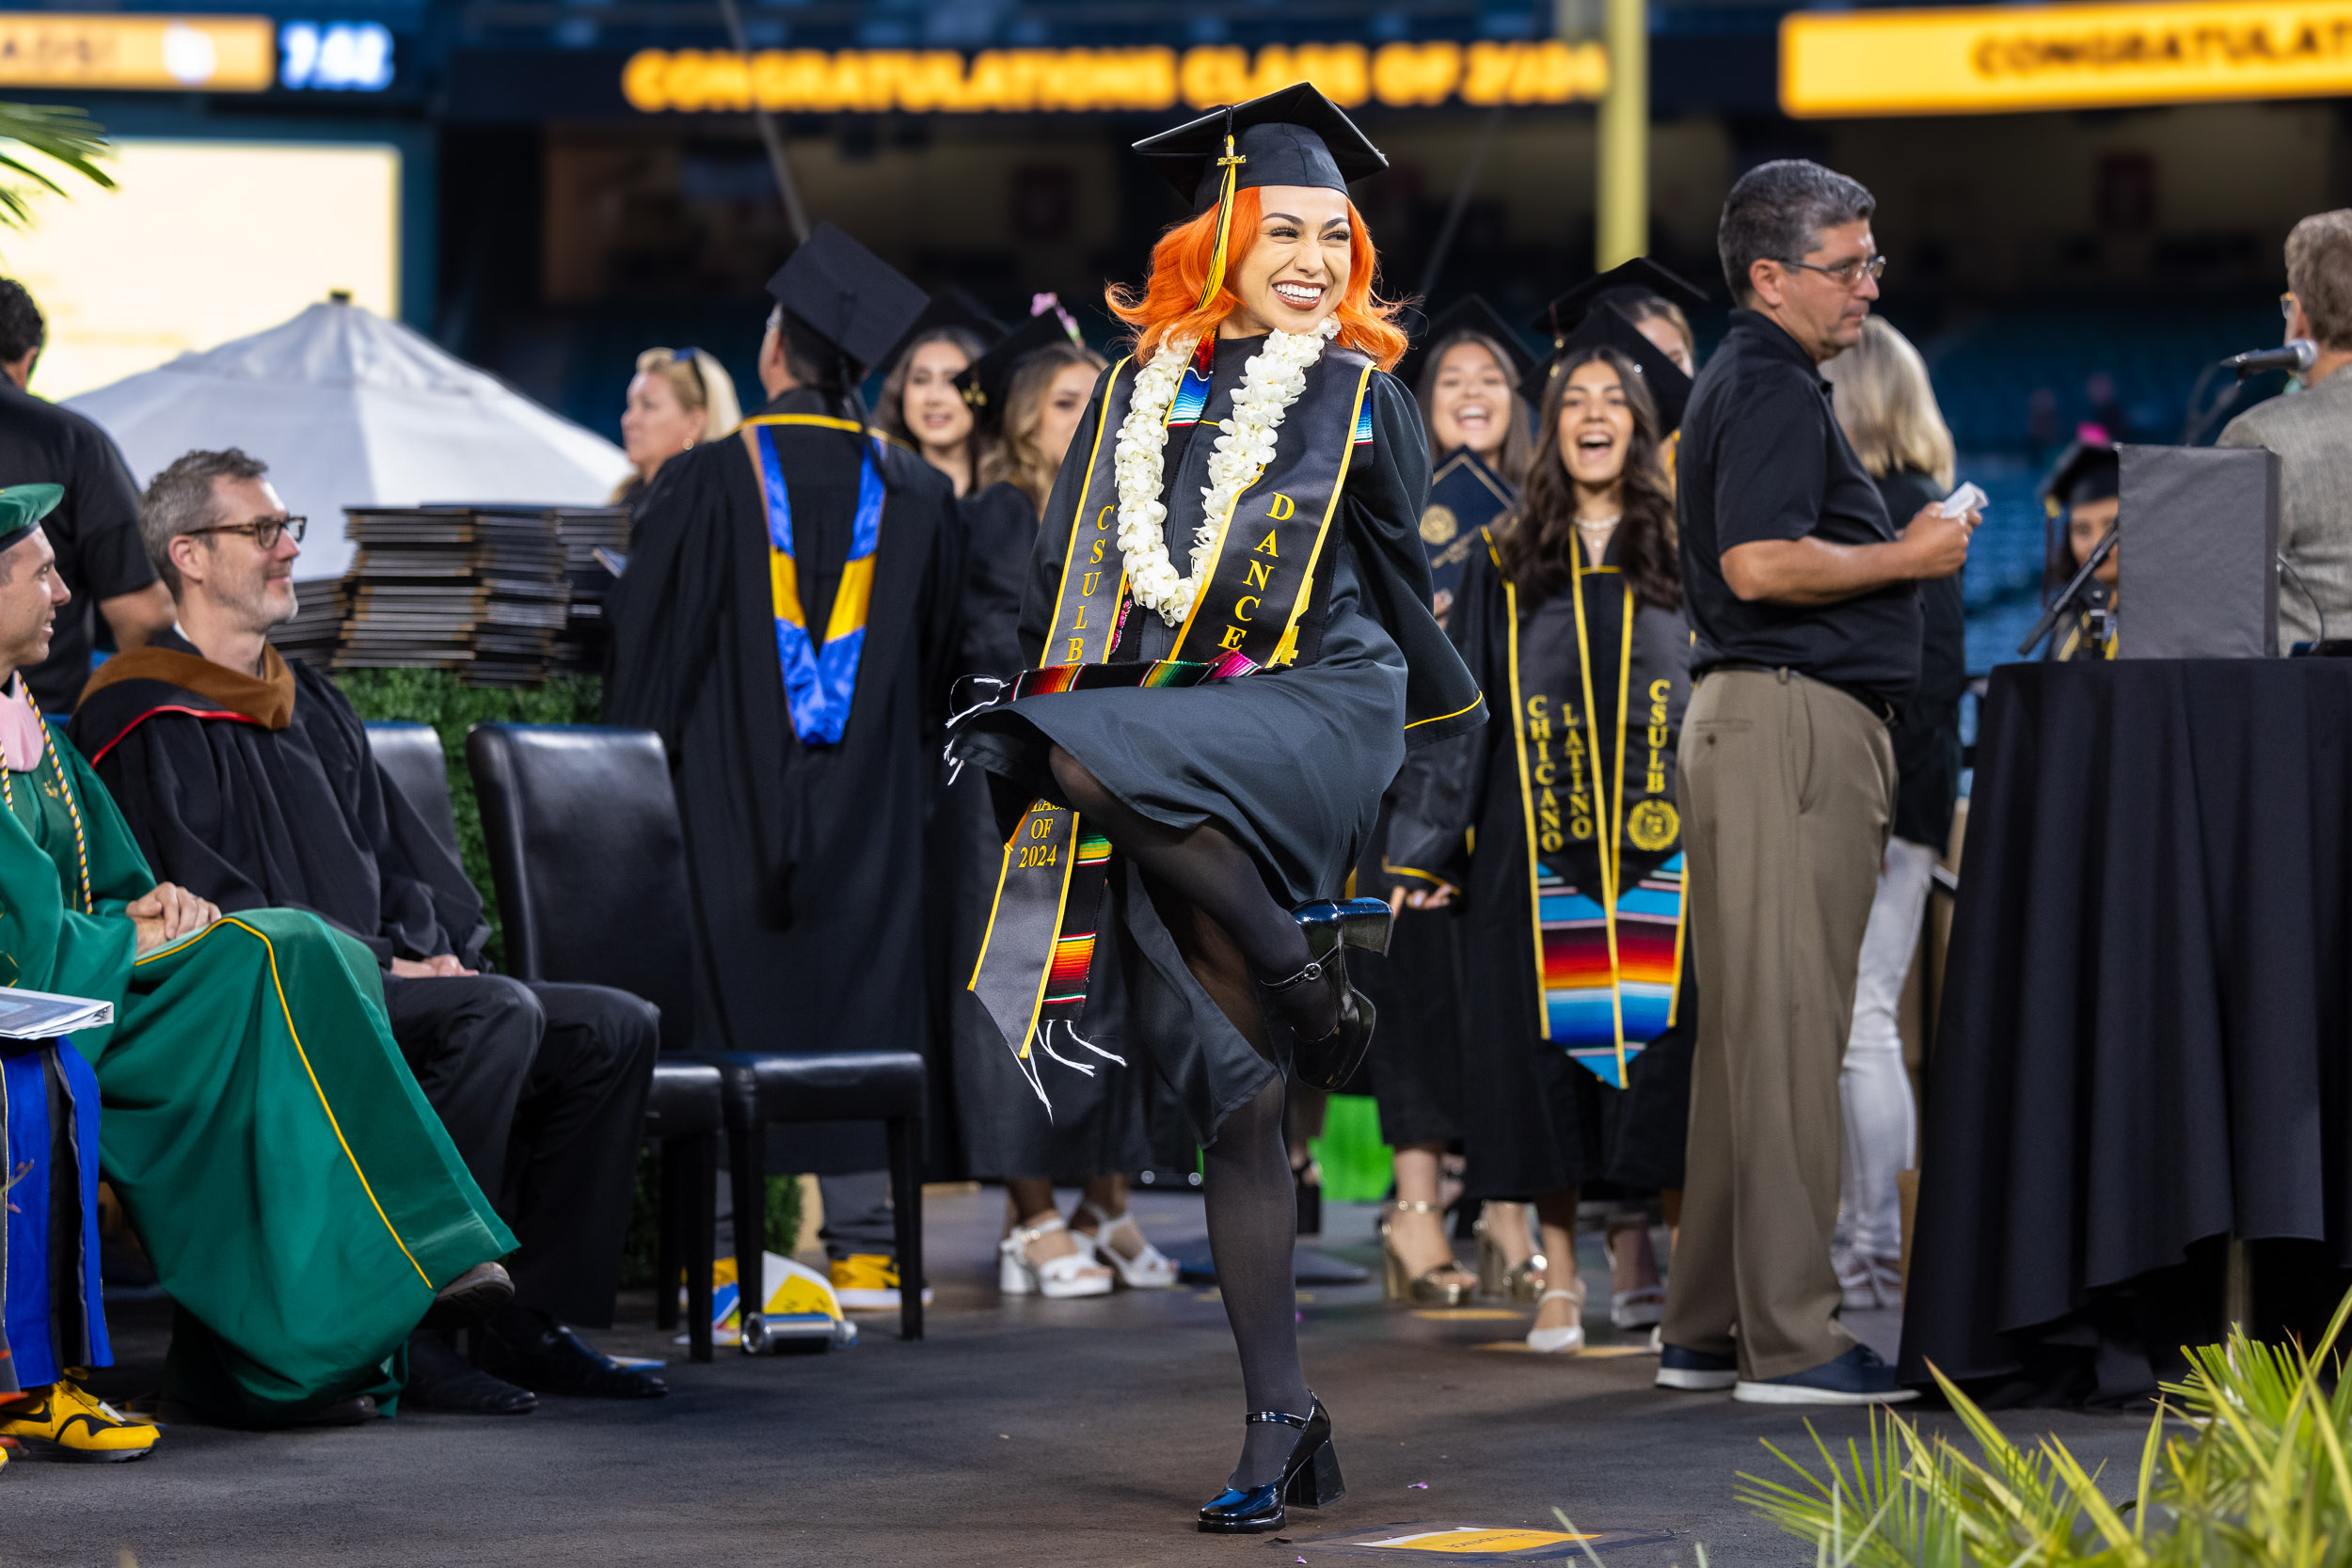 Dance graduate onstage during Commencement